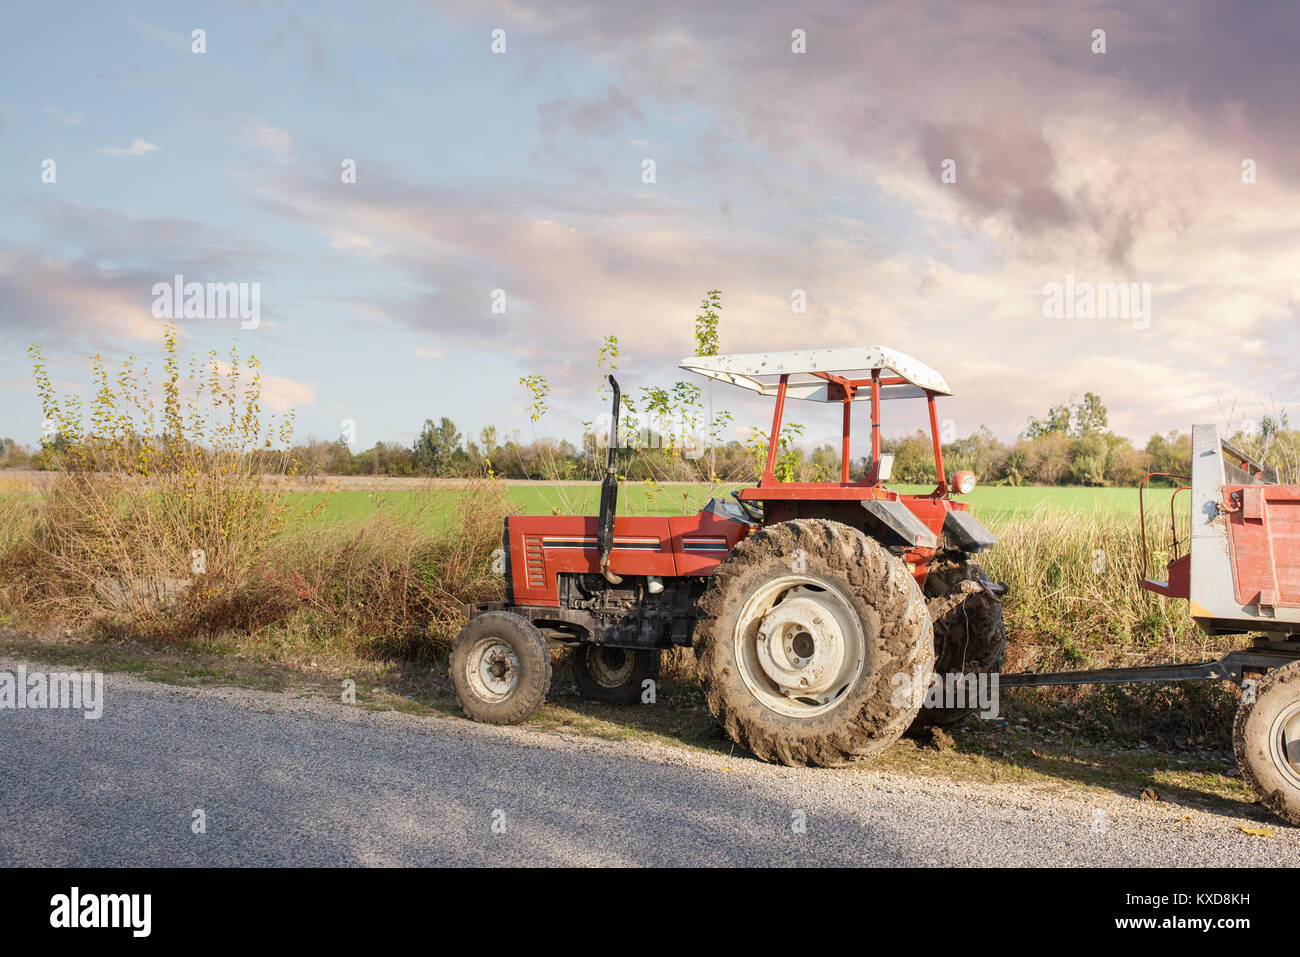 agricultural machinery in the foreground carrying out work in the field Stock Photo